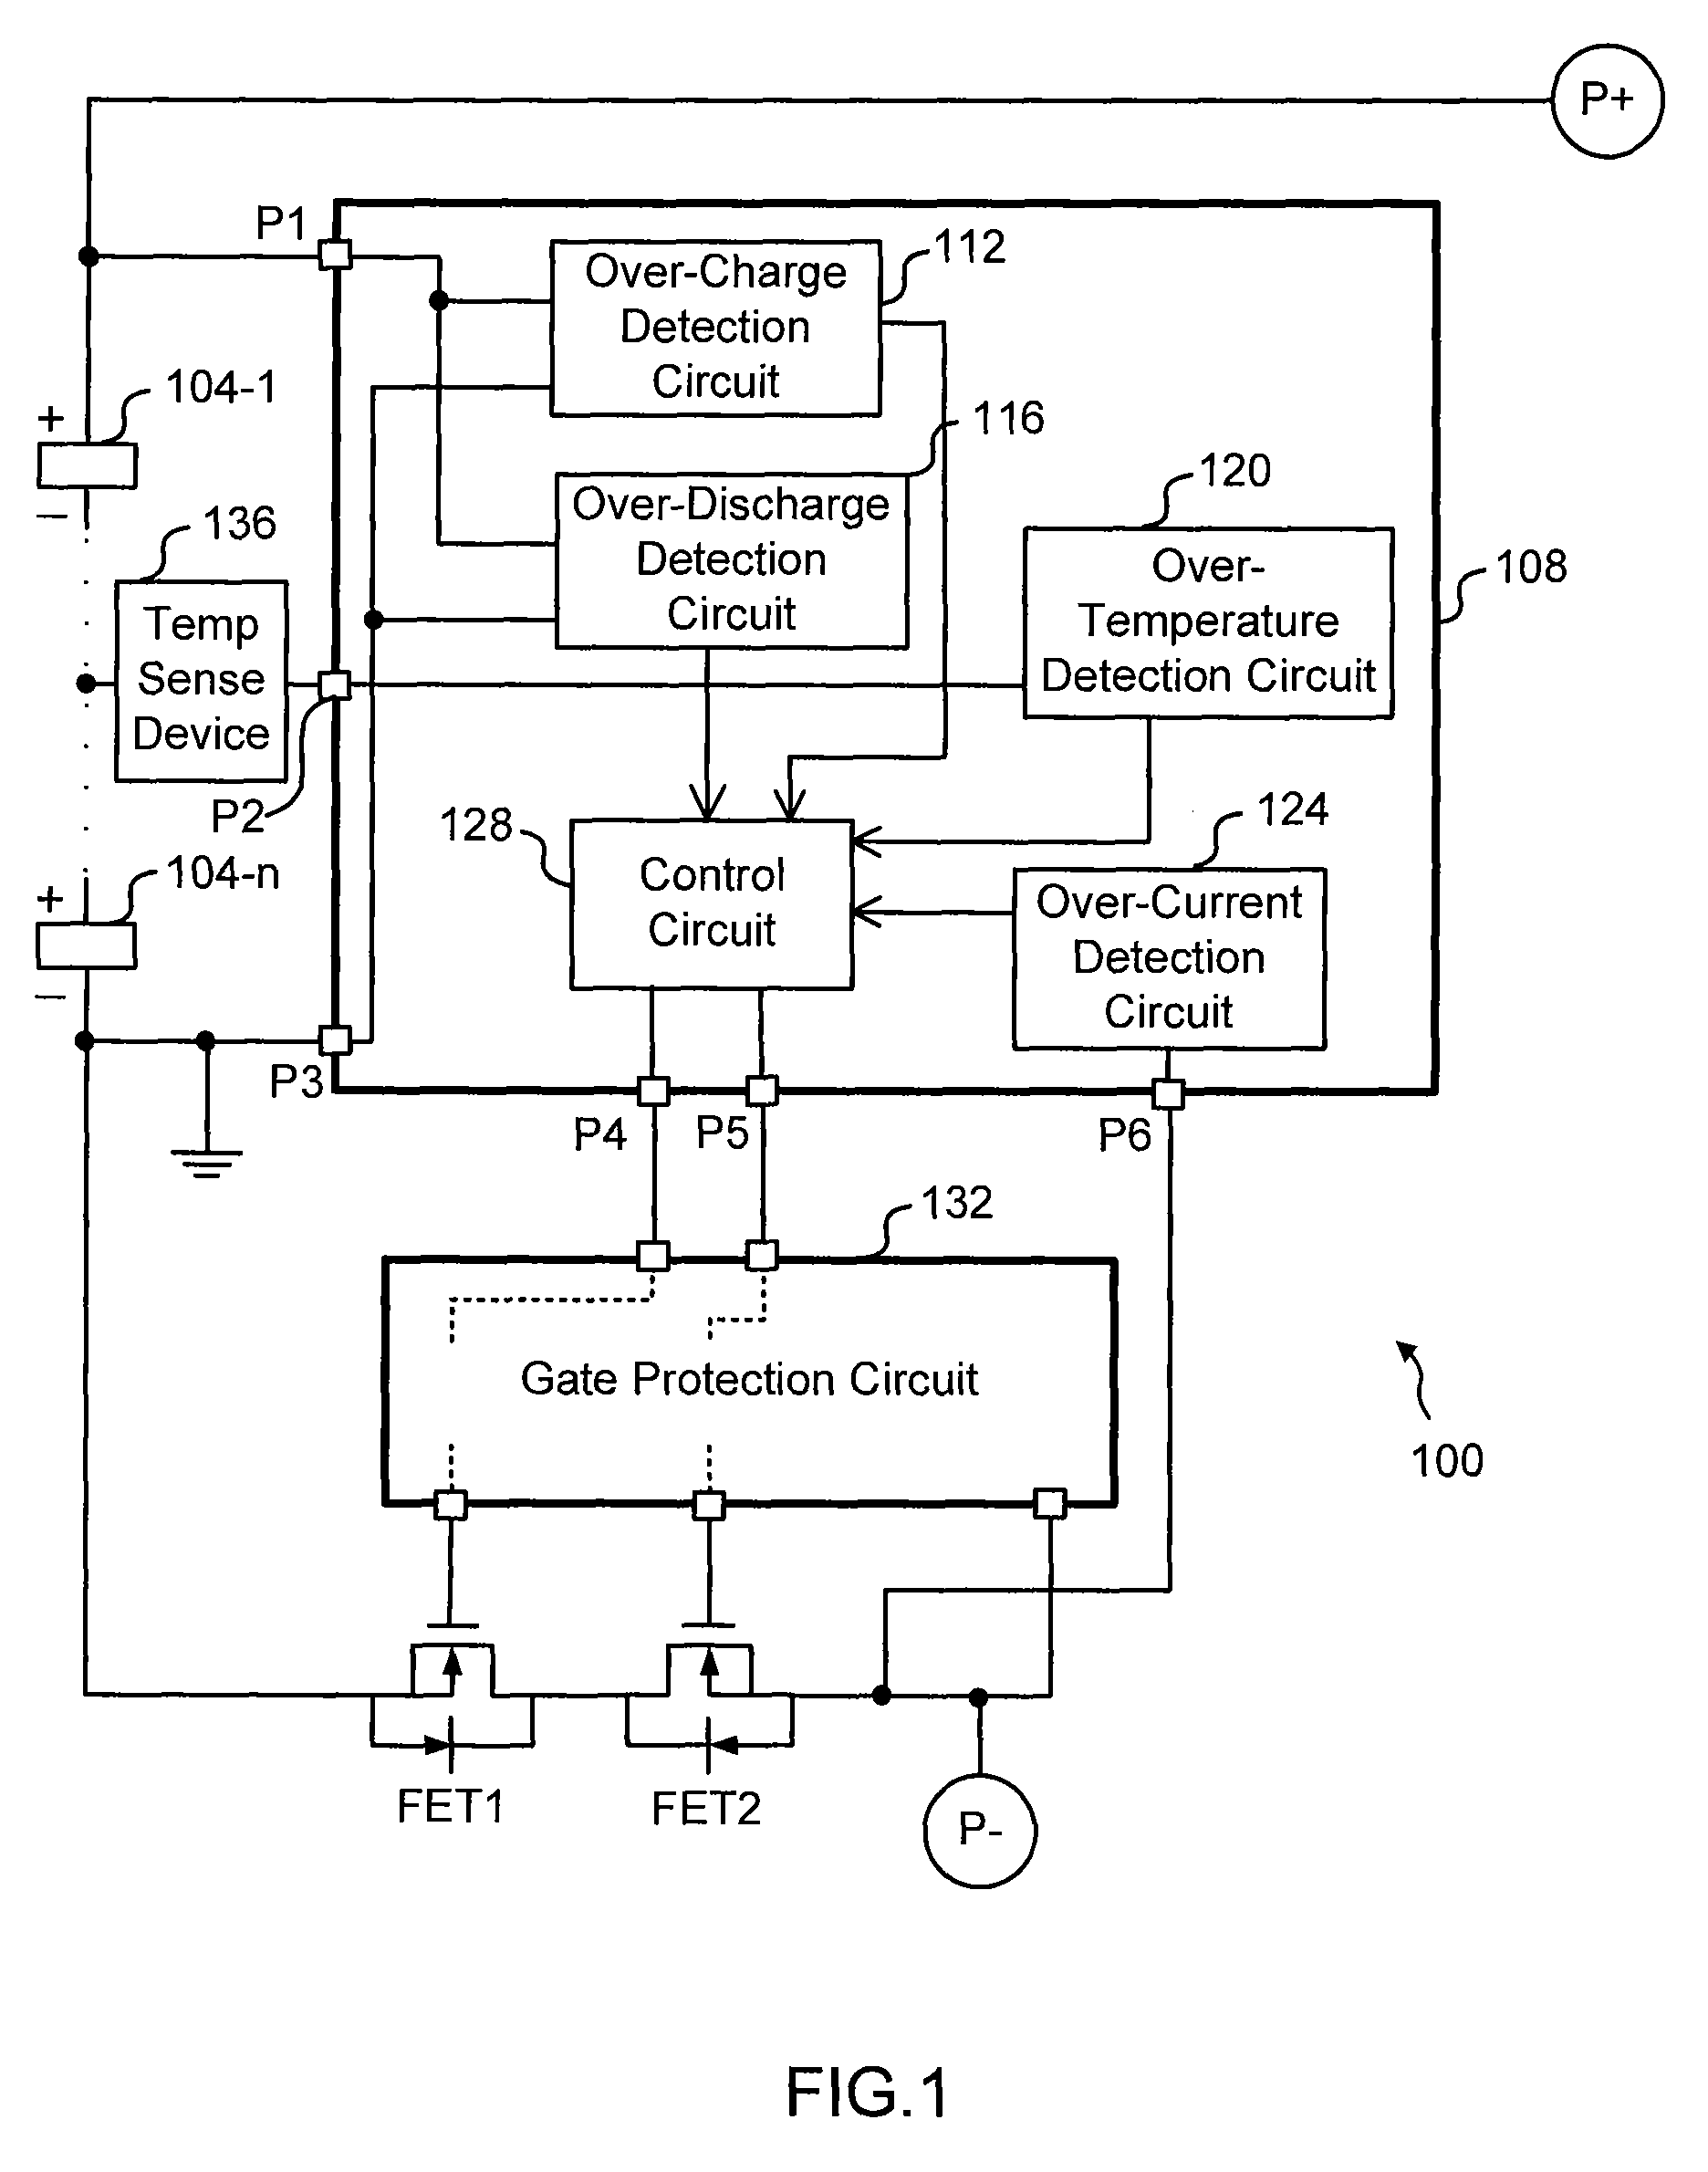 Low side N-channel FET protection circuit